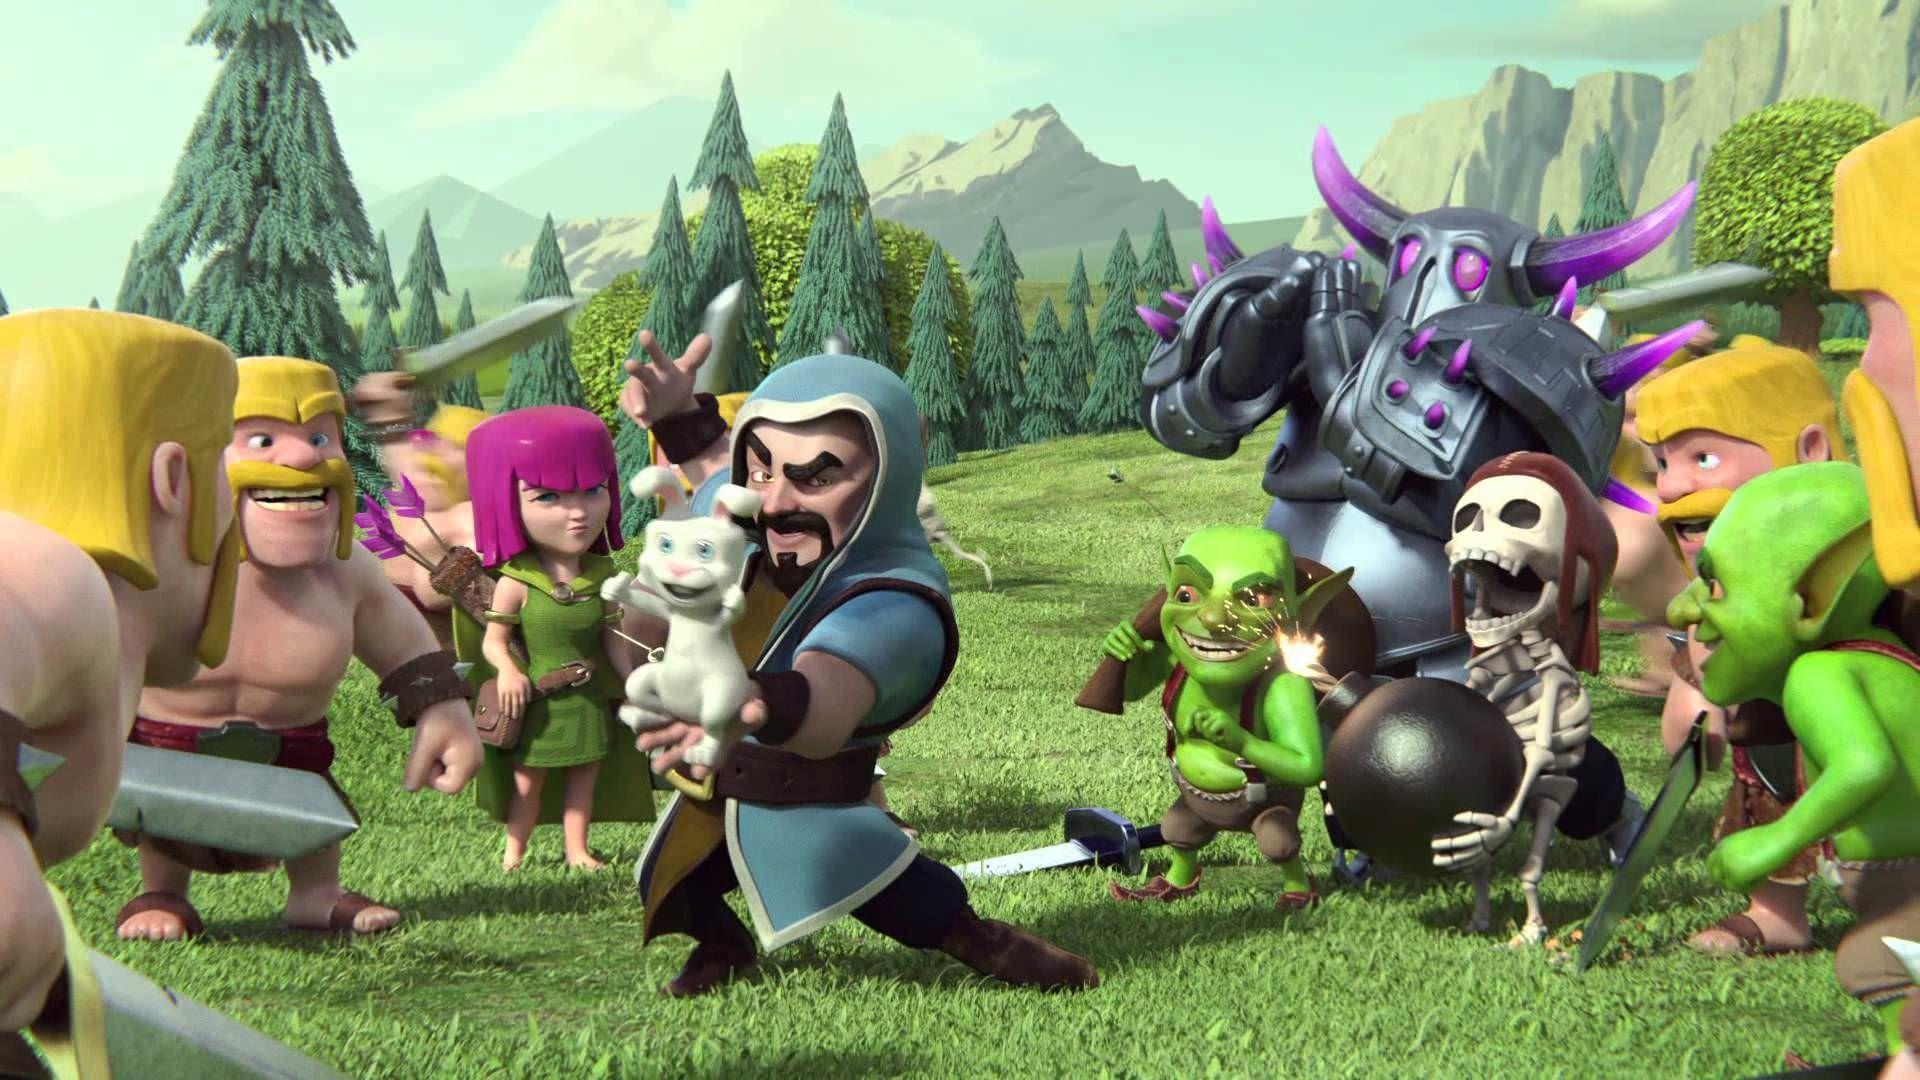 Download Animeted Coc Image